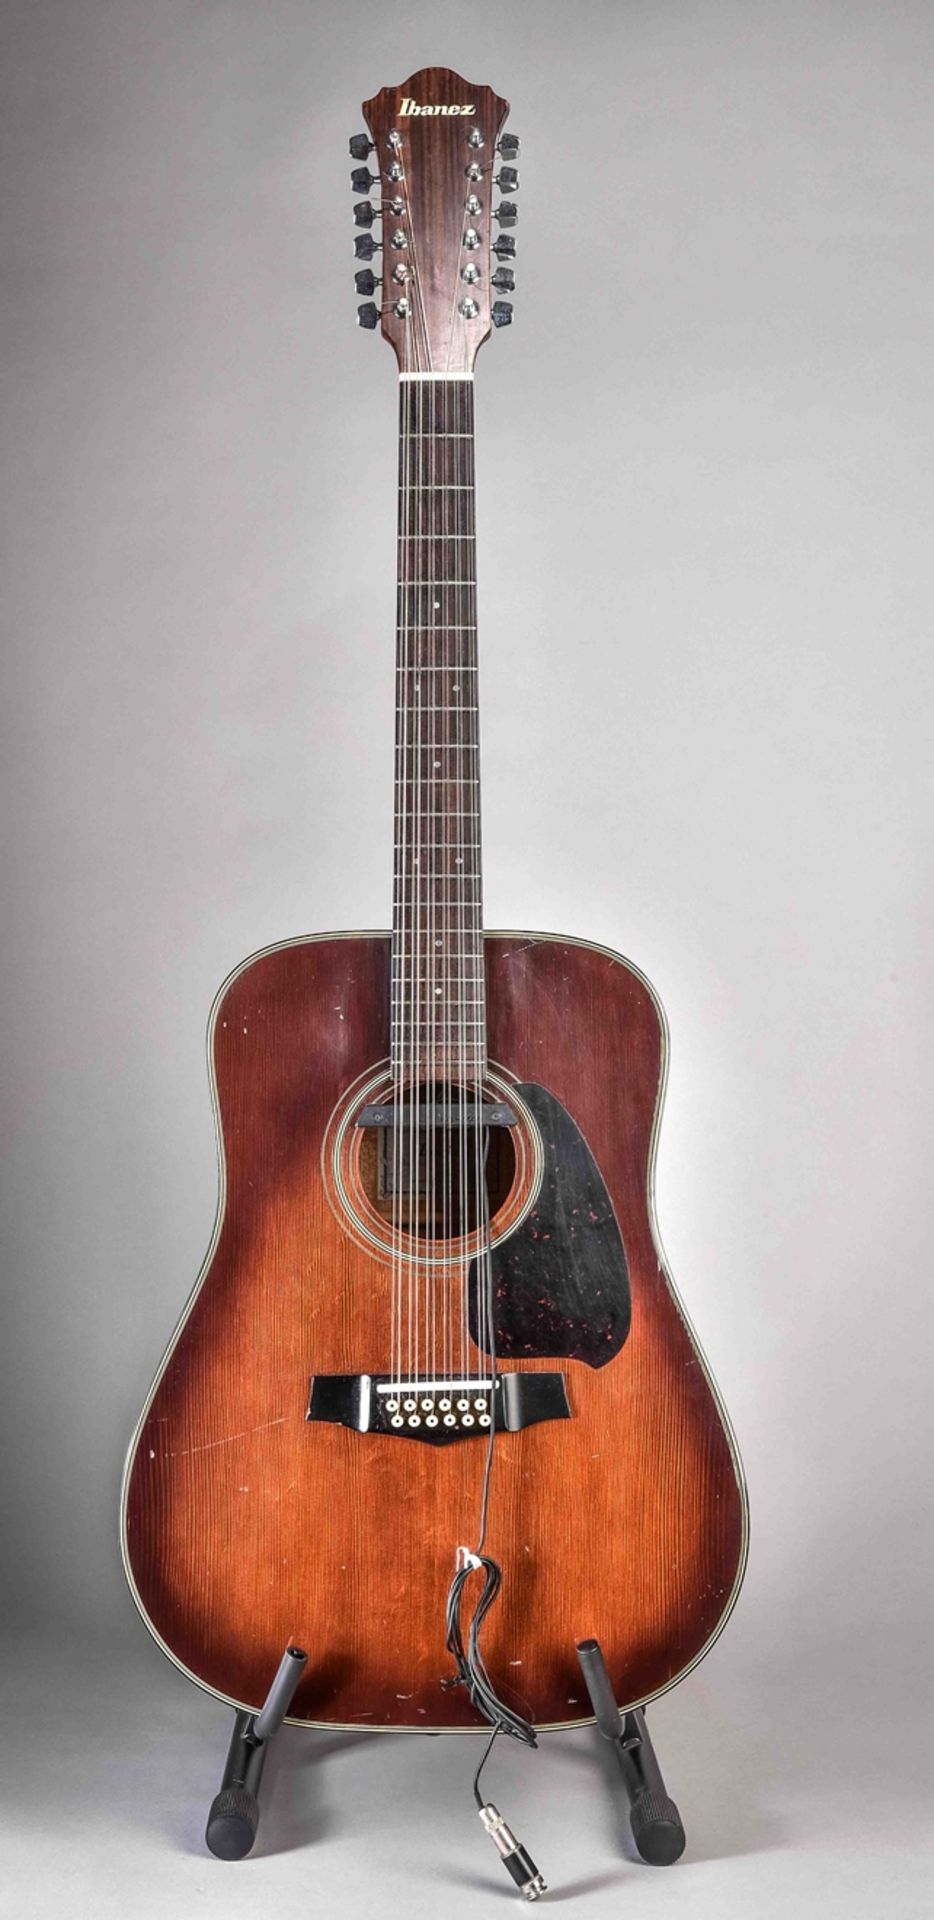 Vintage 12-string acoustic western guitar Ibanez, model V302 TV, dreadnought, with a later built-in